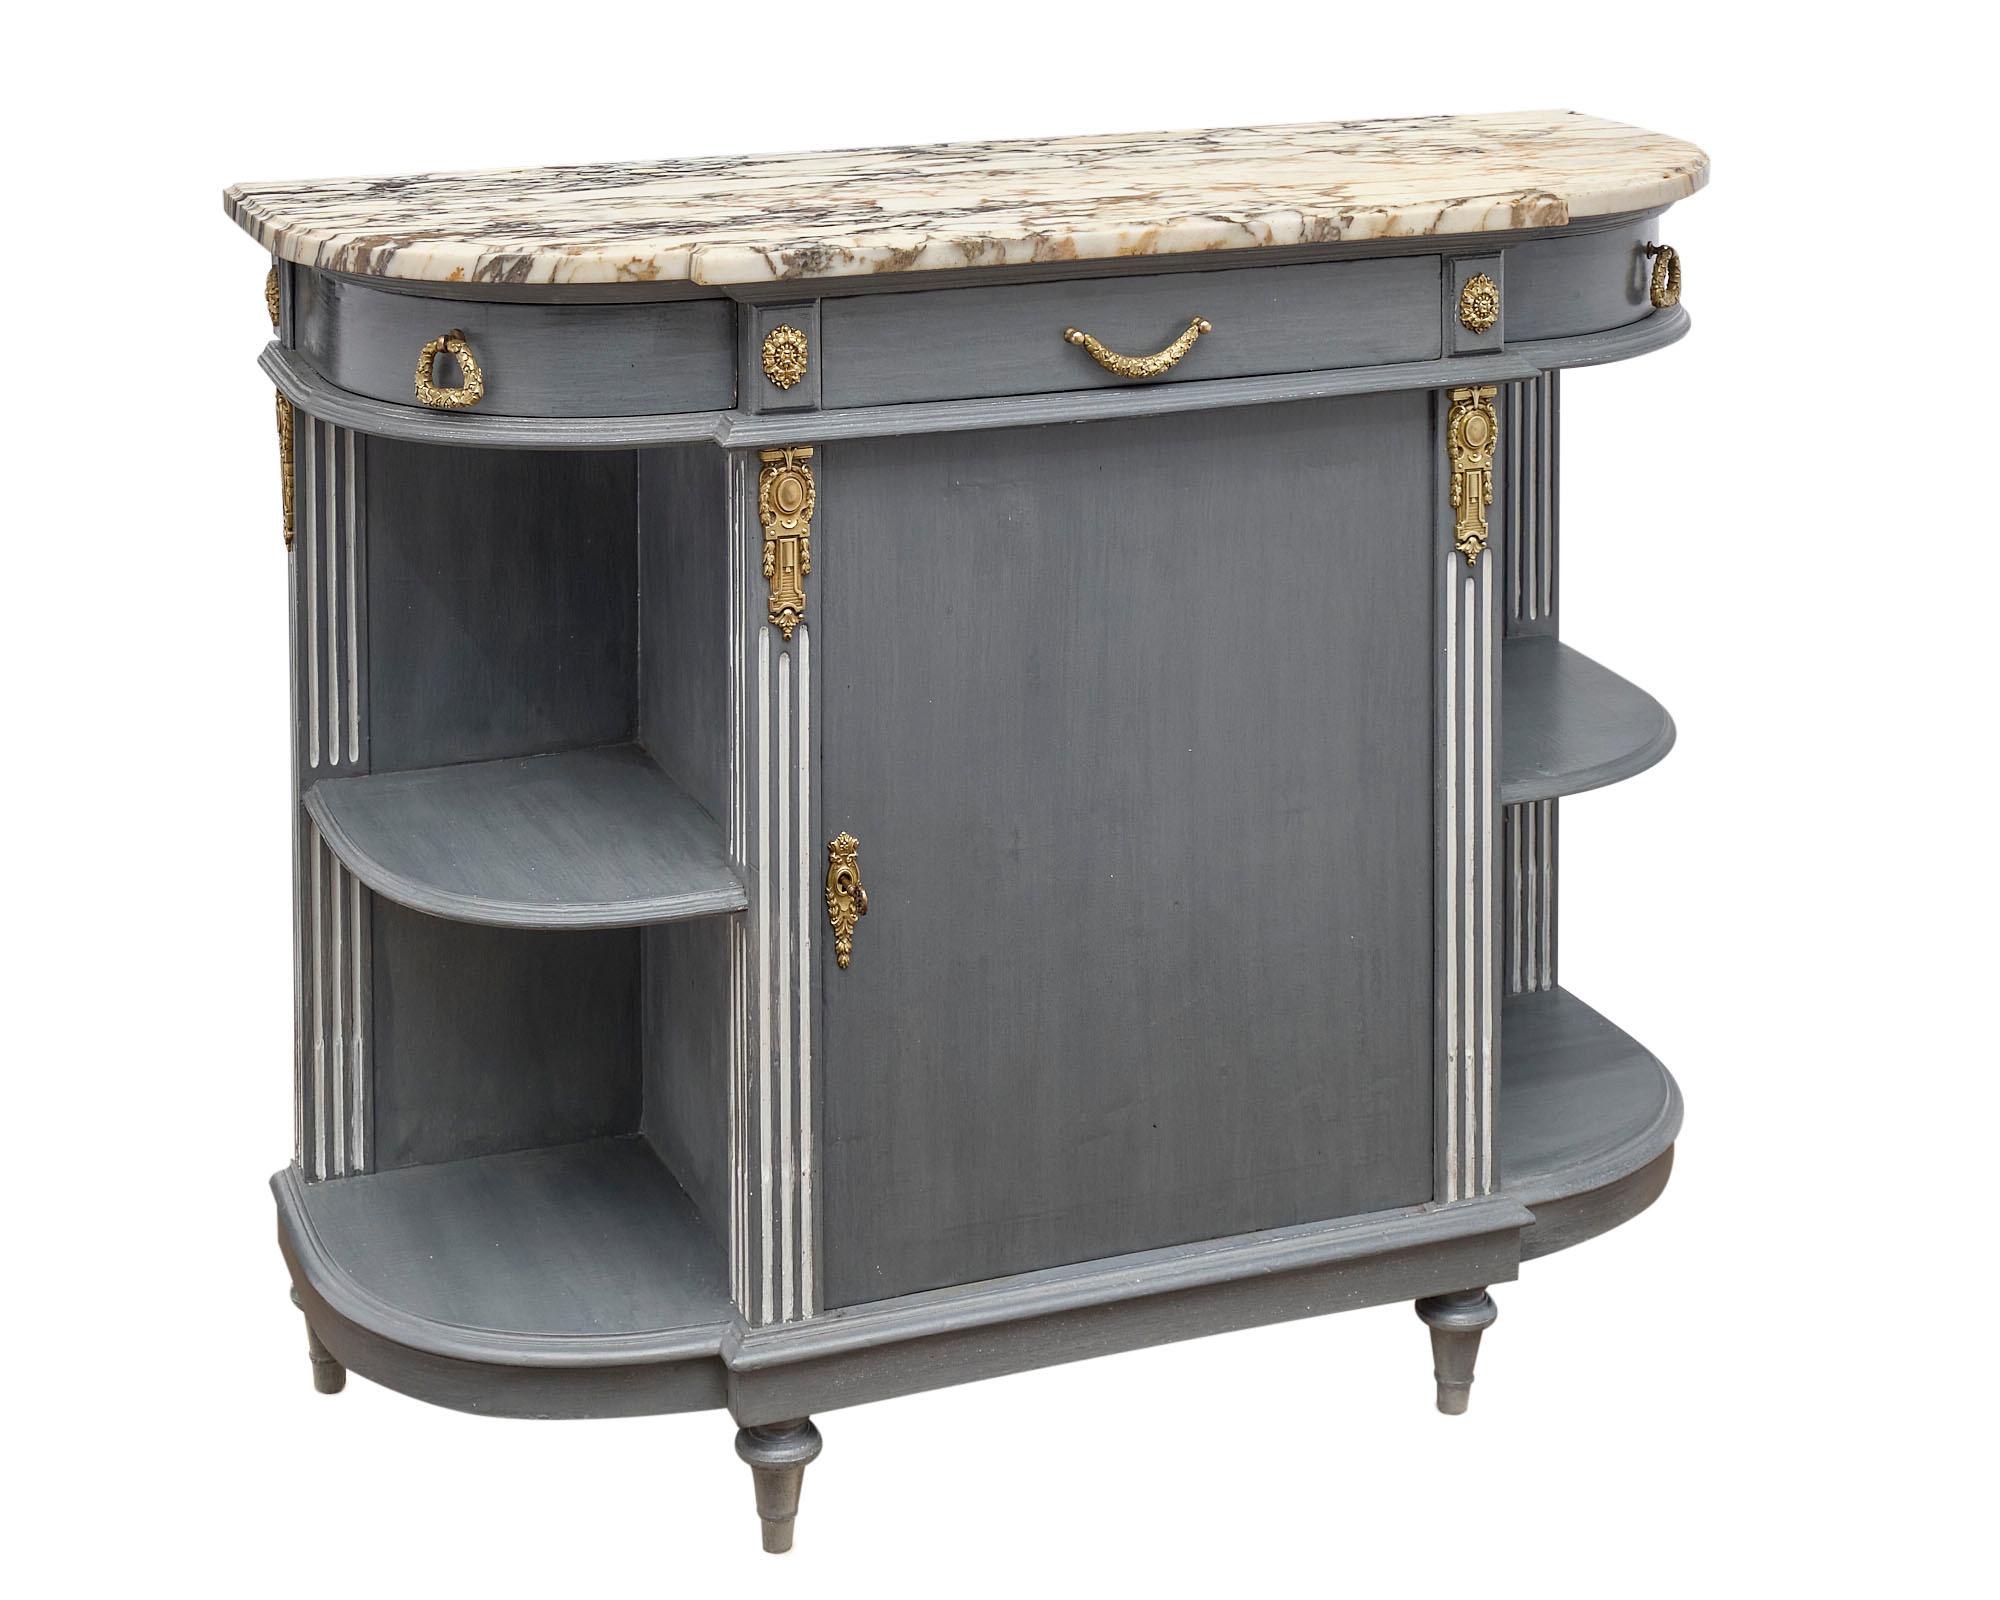 Louis XVI style painted demilune buffet in a “trianon” gray with white accents in the fluting and finely cast gilt bronze hardware. There are three dovetailed drawers above open shelving on the sides and a central door. The sideboard is topped with